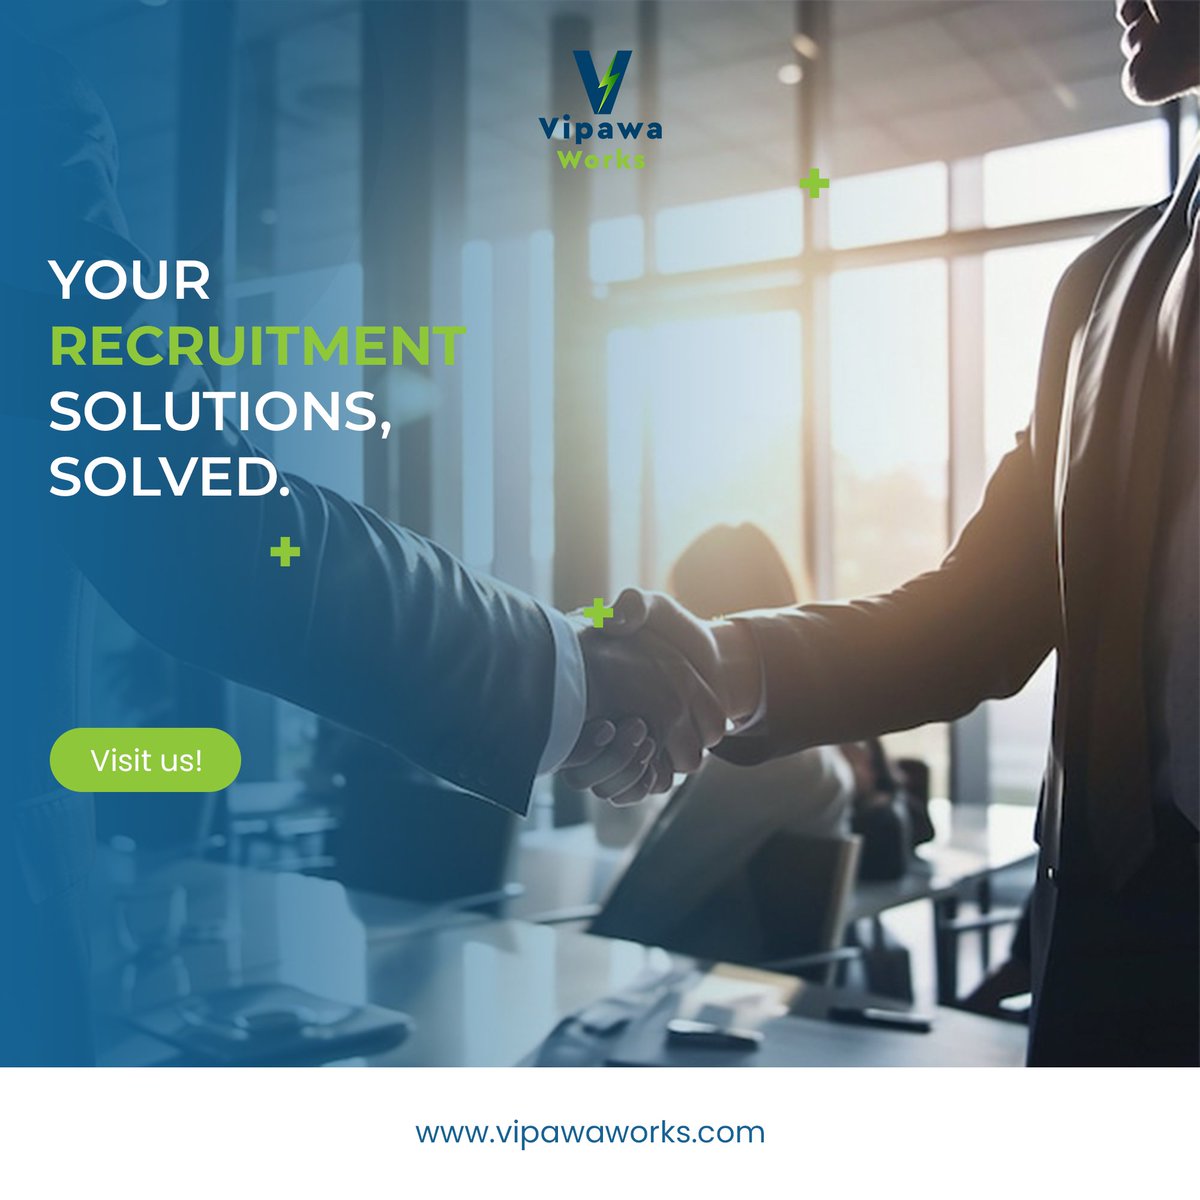 No matter the professionals you need, we will assist your company hires the right talent!⁣ ⁣ Talk to us today to see how you can improve your company's performance:

#Vipawaworks #recruitinglife #recruitmentconsultants #jobopening #careersuccess